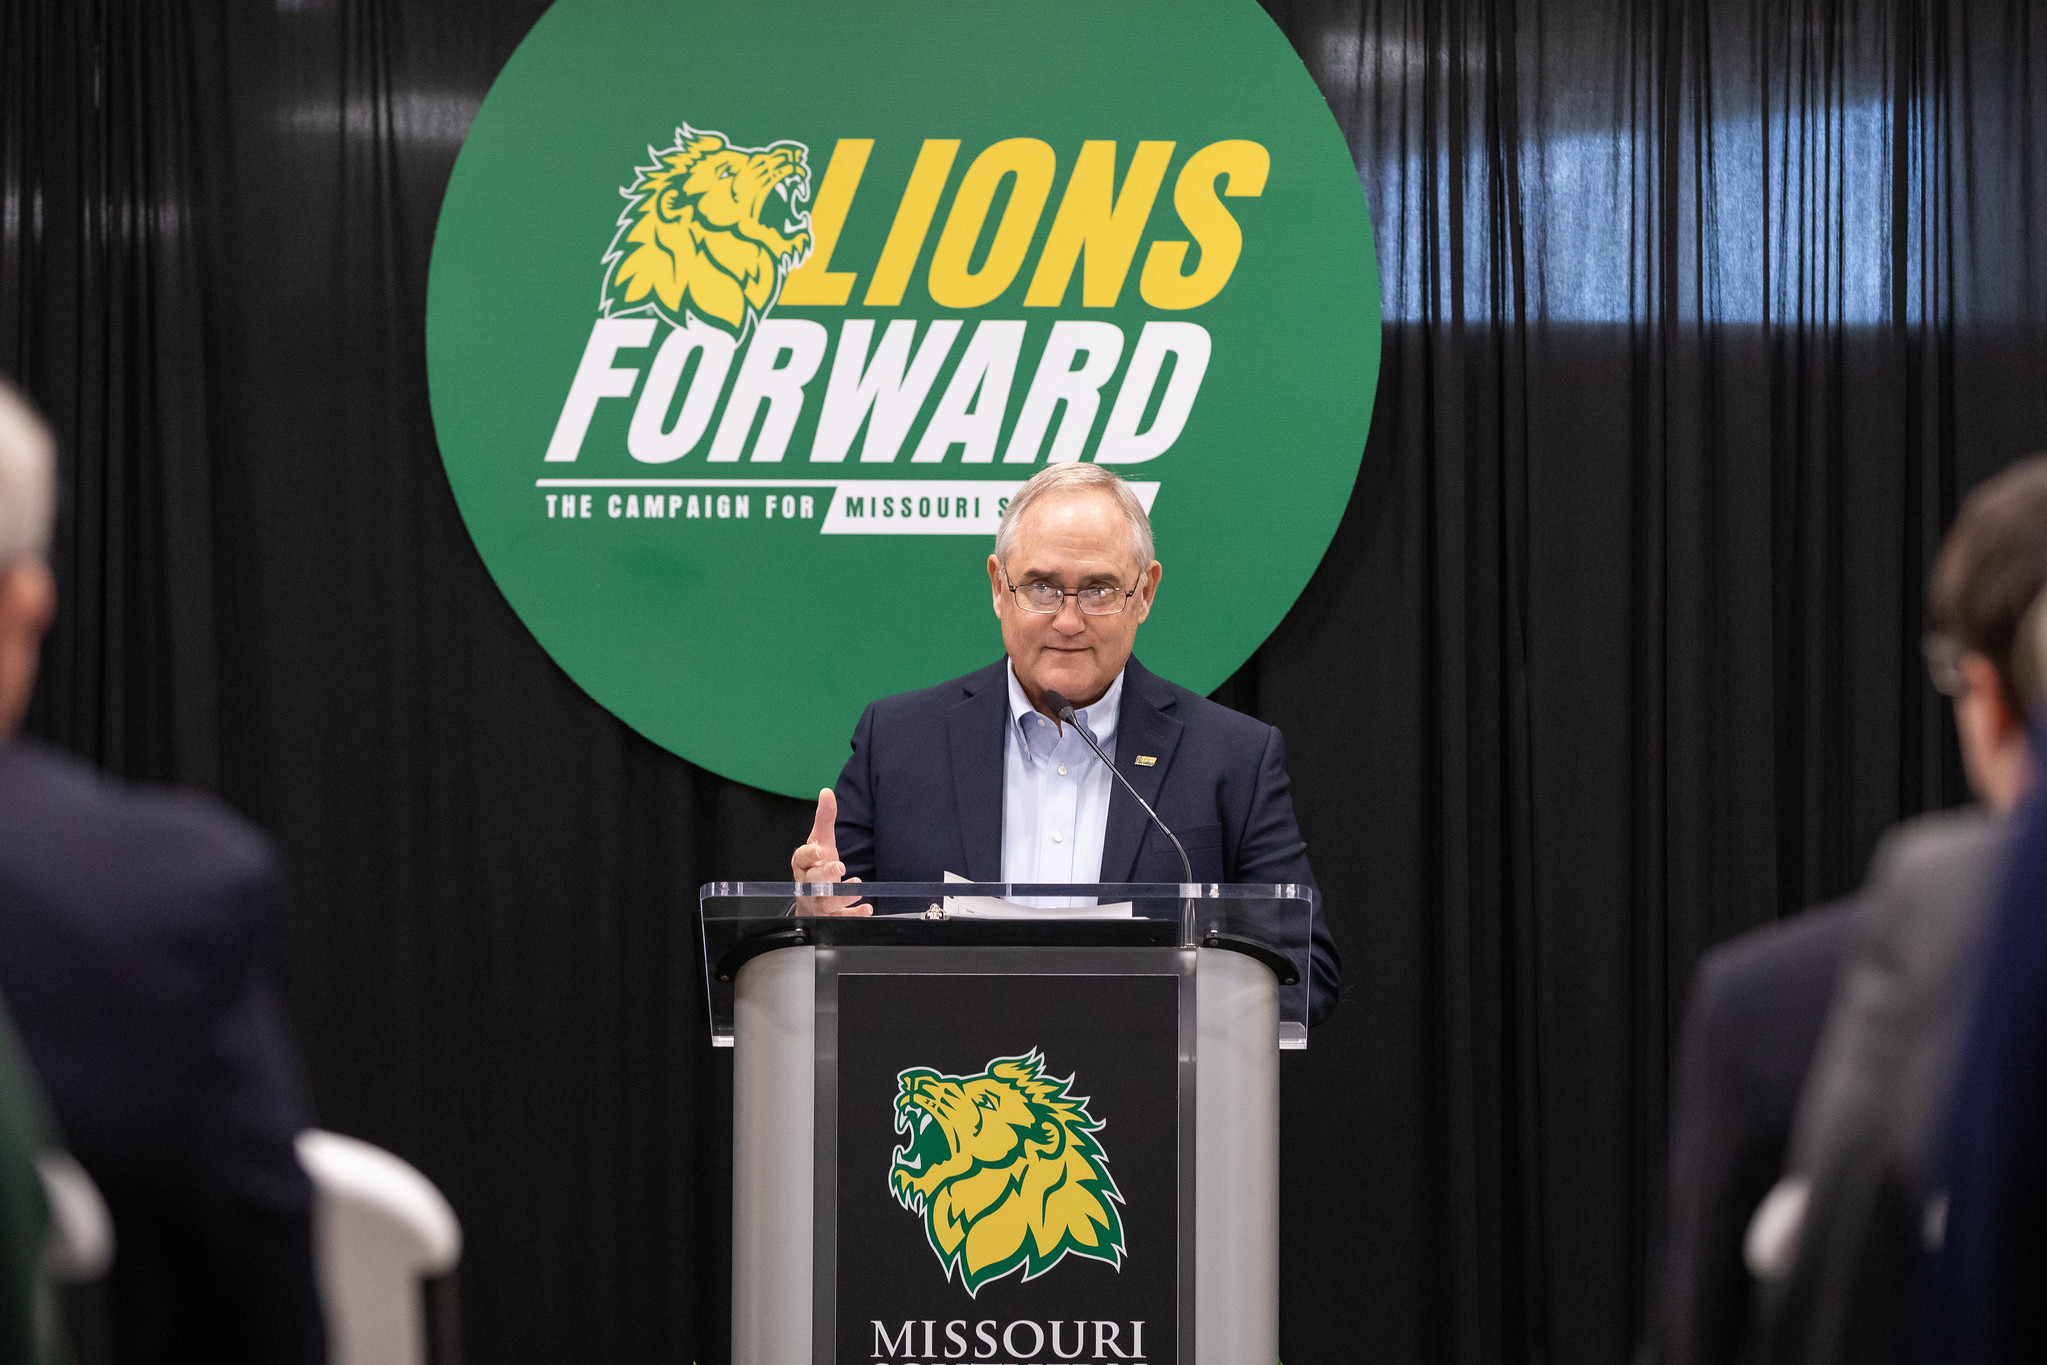 MSSU ANNOUNCES TRANSFORMATIONAL GIFT FOR LIONS FORWARD CAMPAIGN